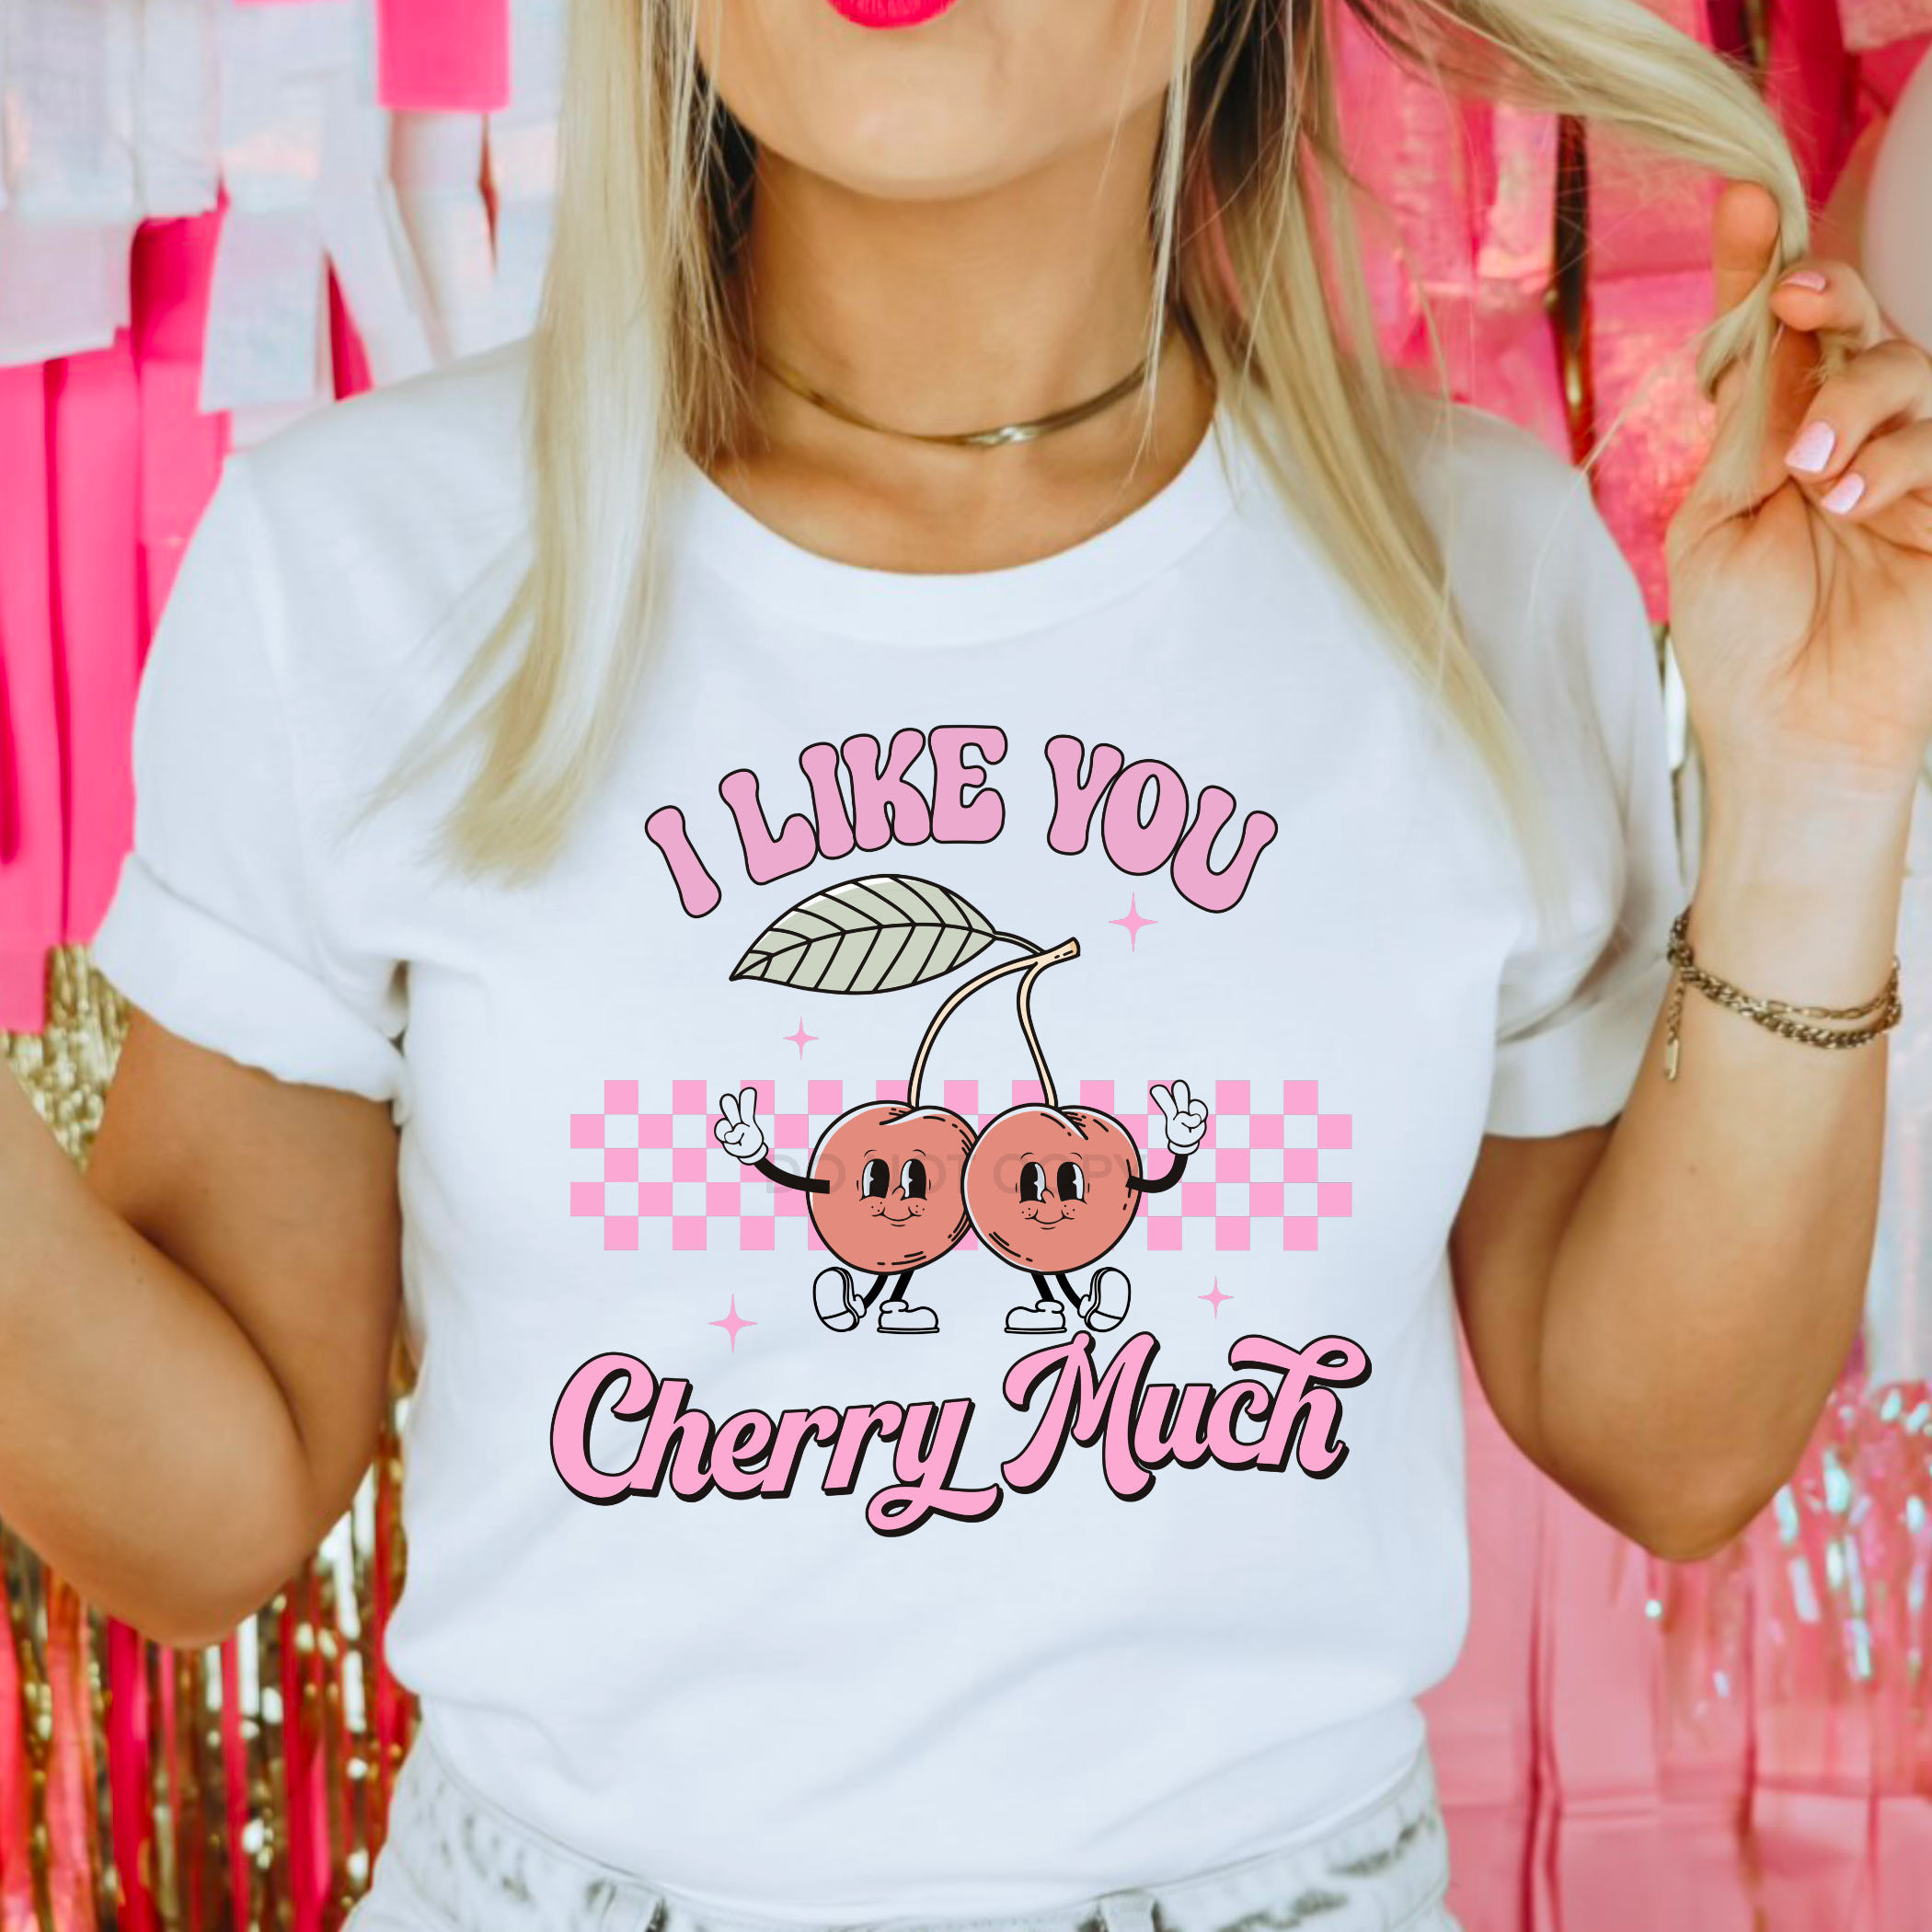 I Love You Cherry Much Sublimation Transfer